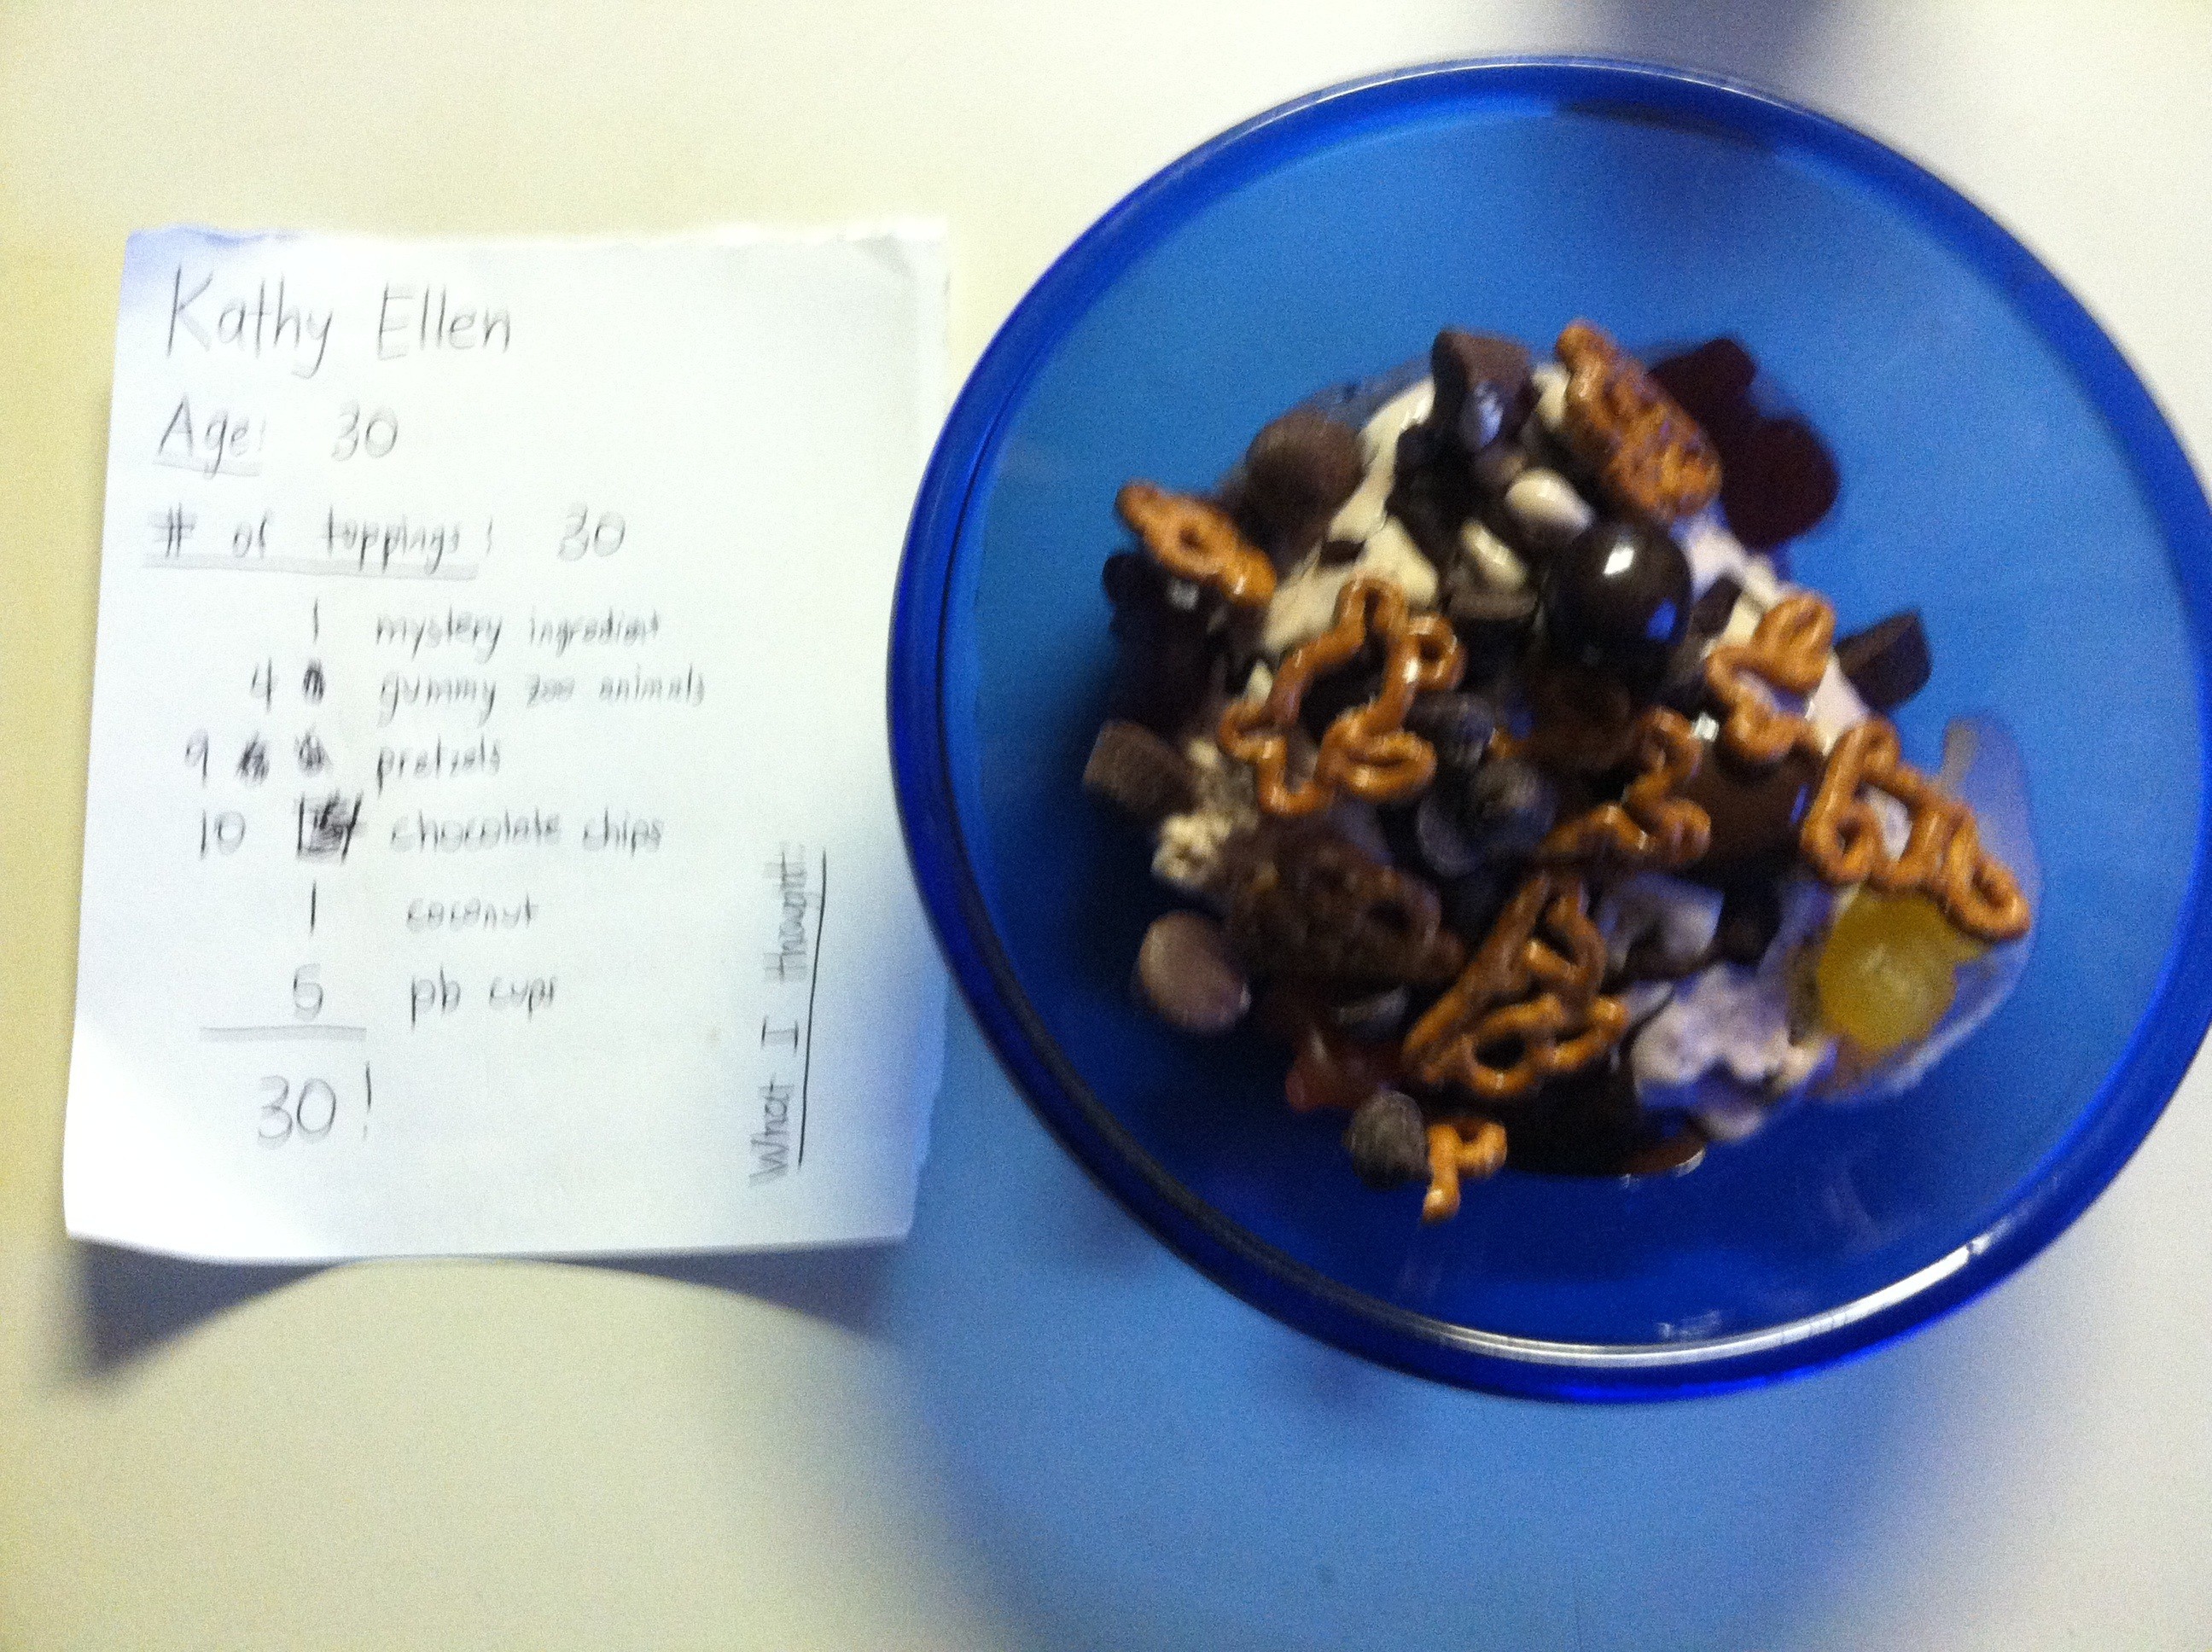 My ice cream and list. I forgot to mention we melted chocolate and poured it over the top...then it solidified. Yummy!